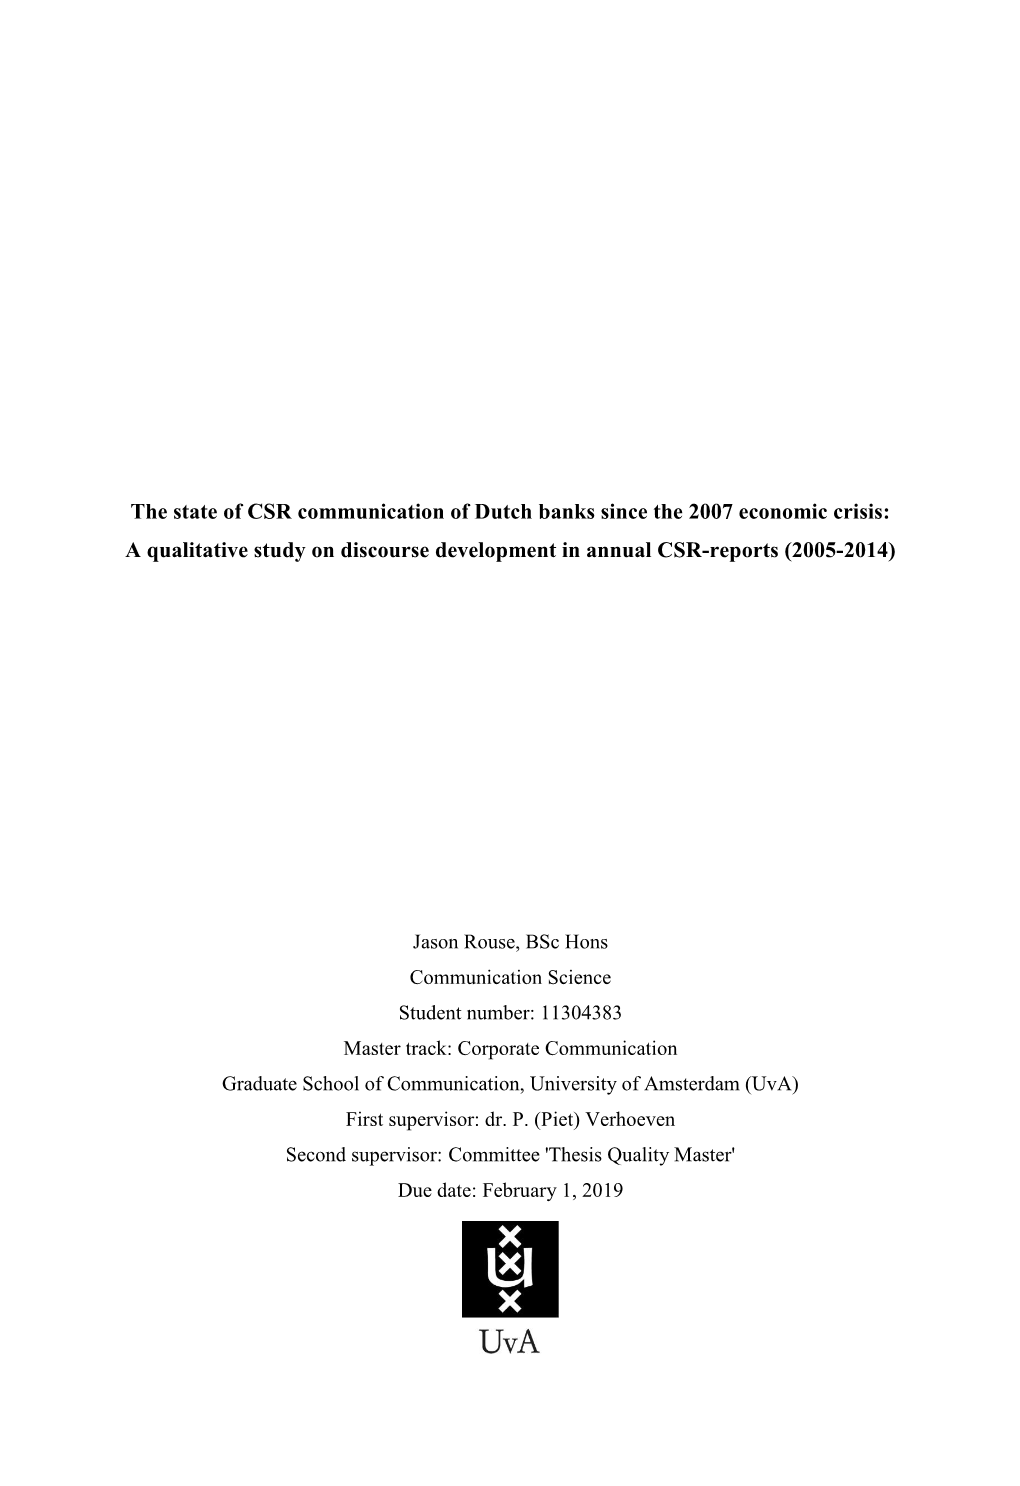 The State of CSR Communication of Dutch Banks Since the 2007 Economic Crisis: a Qualitative Study on Discourse Development in Annual CSR-Reports (2005-2014)